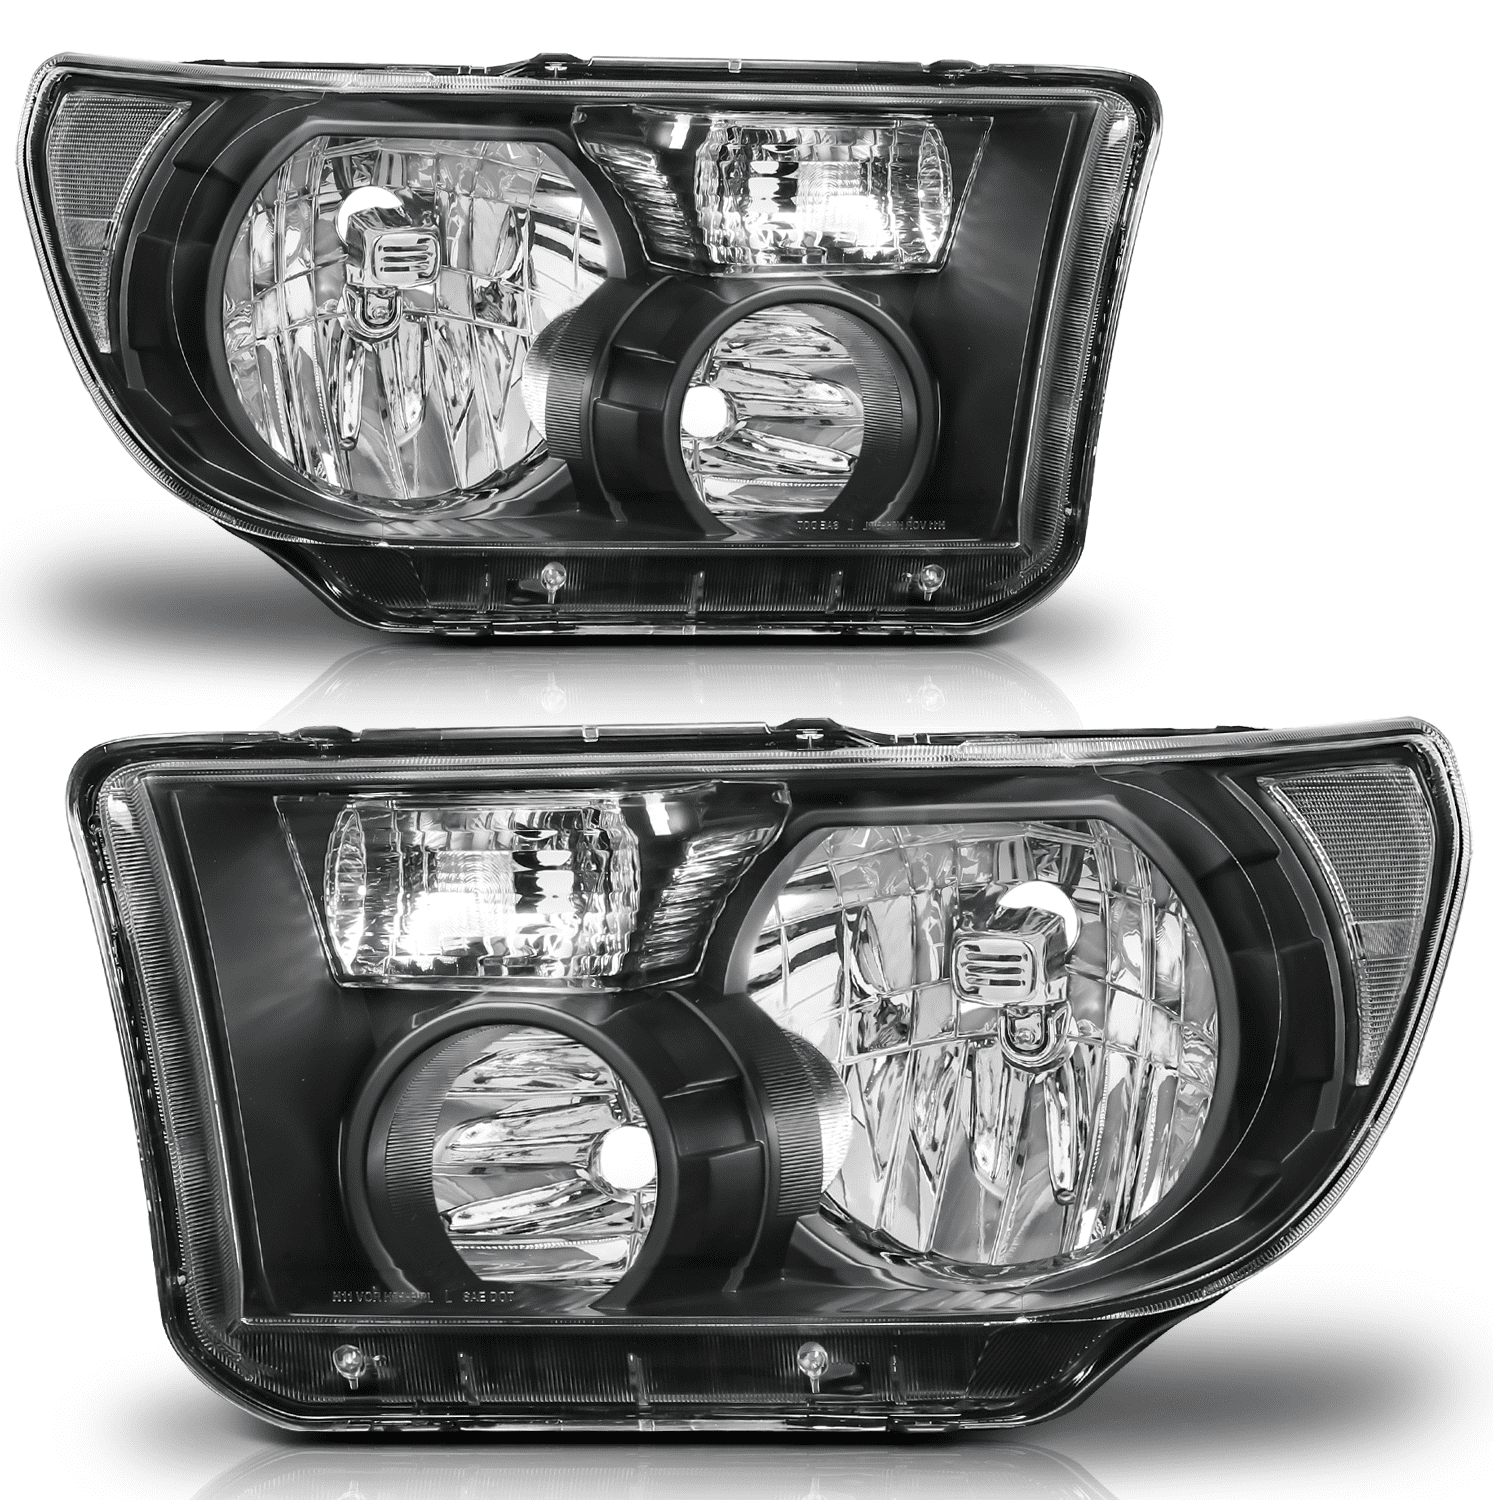 M-AUTO Headlight Assembly for 08-17 Toyota Sequoia / 07-13 Toyota Tundra  Pickup, Black Housing Clear Lens Clear Corner